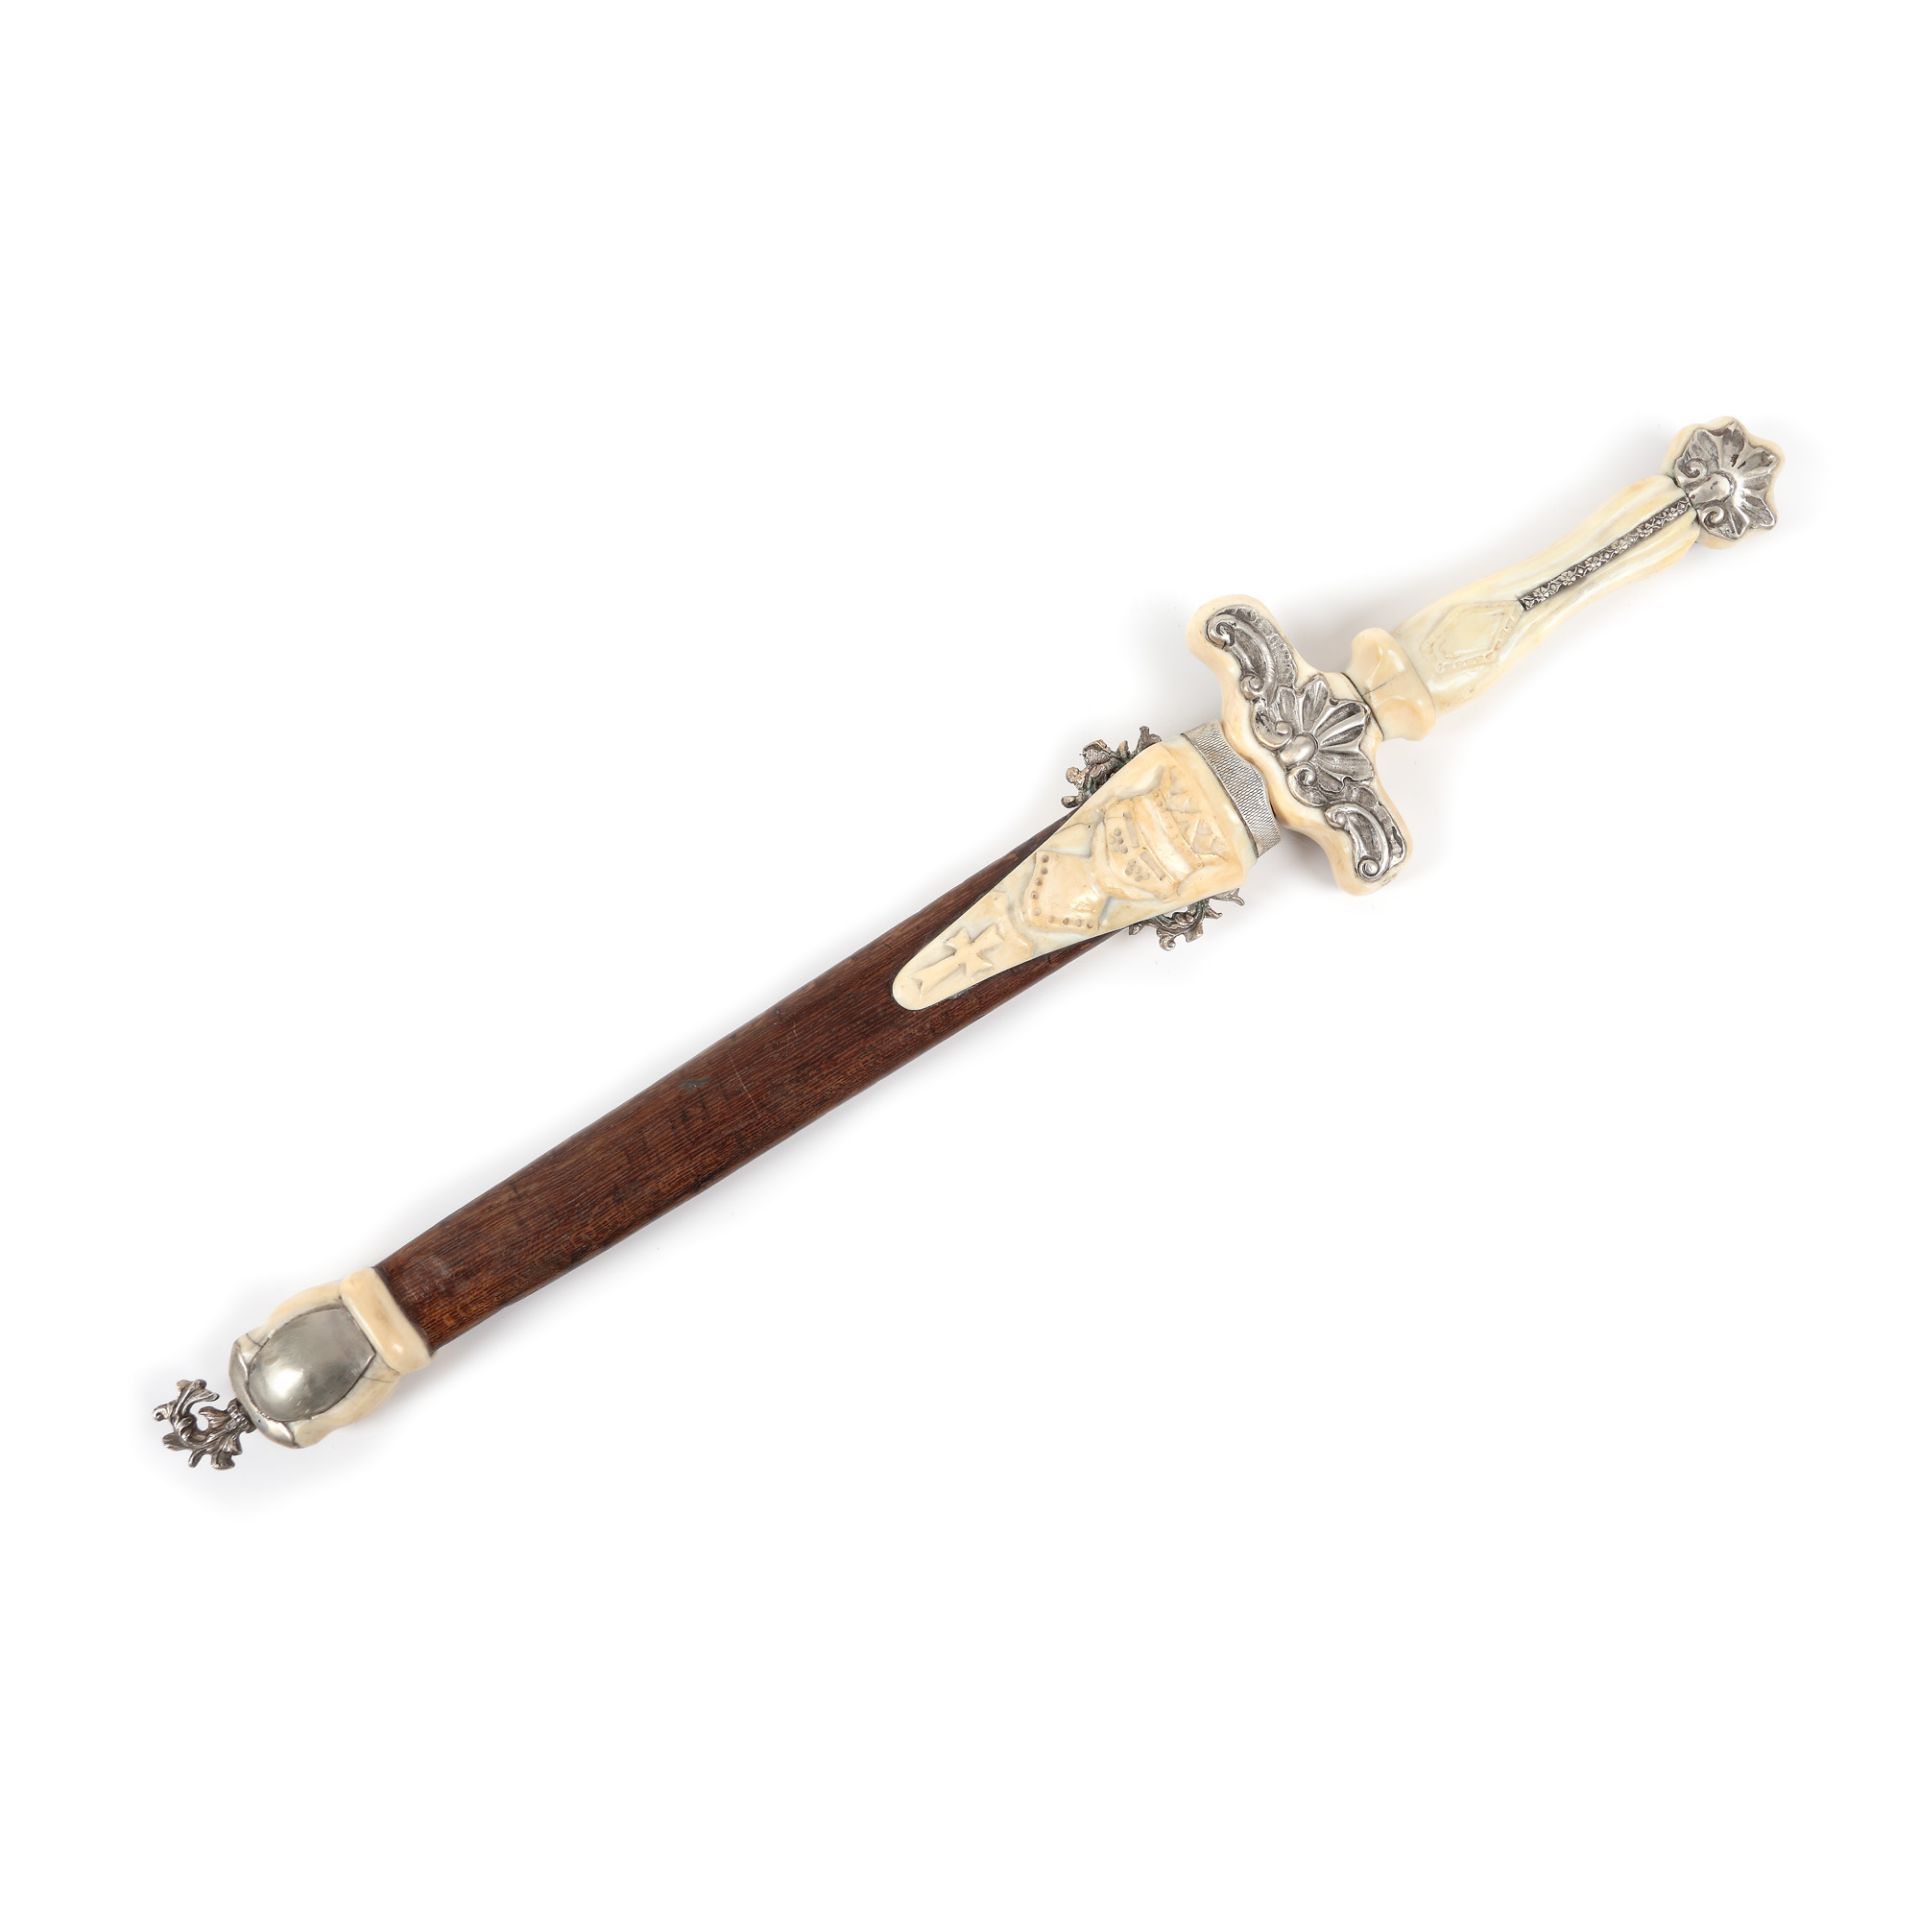 Ceremonial dagger, handle and sheath decorated with silver and ivory, bearing the Cross of Malta and - Image 2 of 5